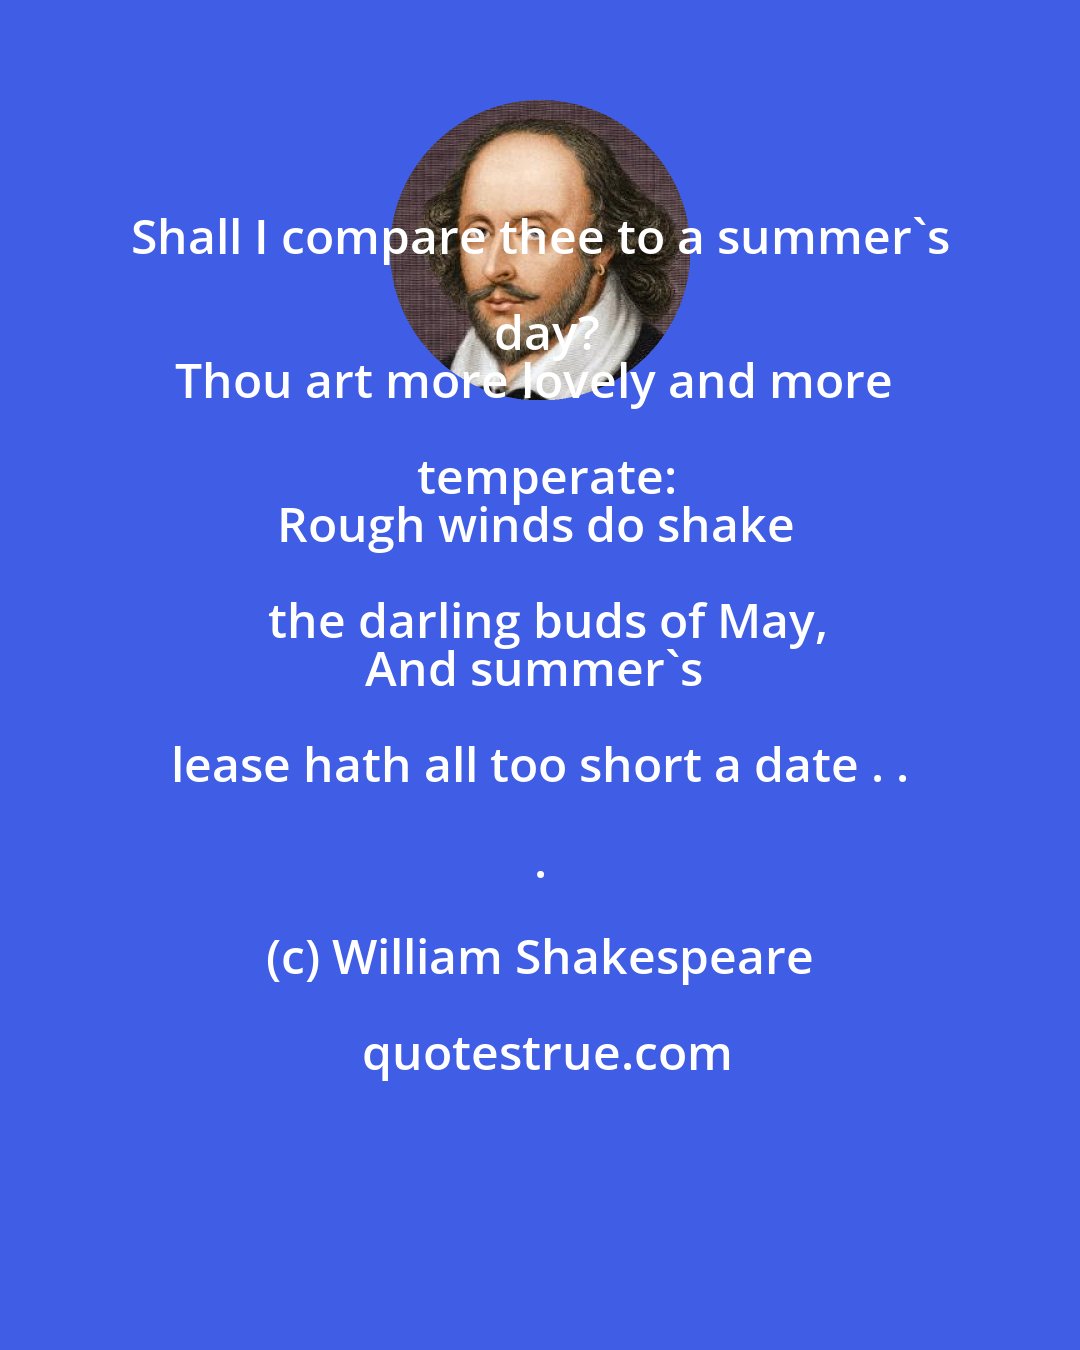 William Shakespeare: Shall I compare thee to a summer's day?
Thou art more lovely and more temperate:
Rough winds do shake the darling buds of May,
And summer's lease hath all too short a date . . .